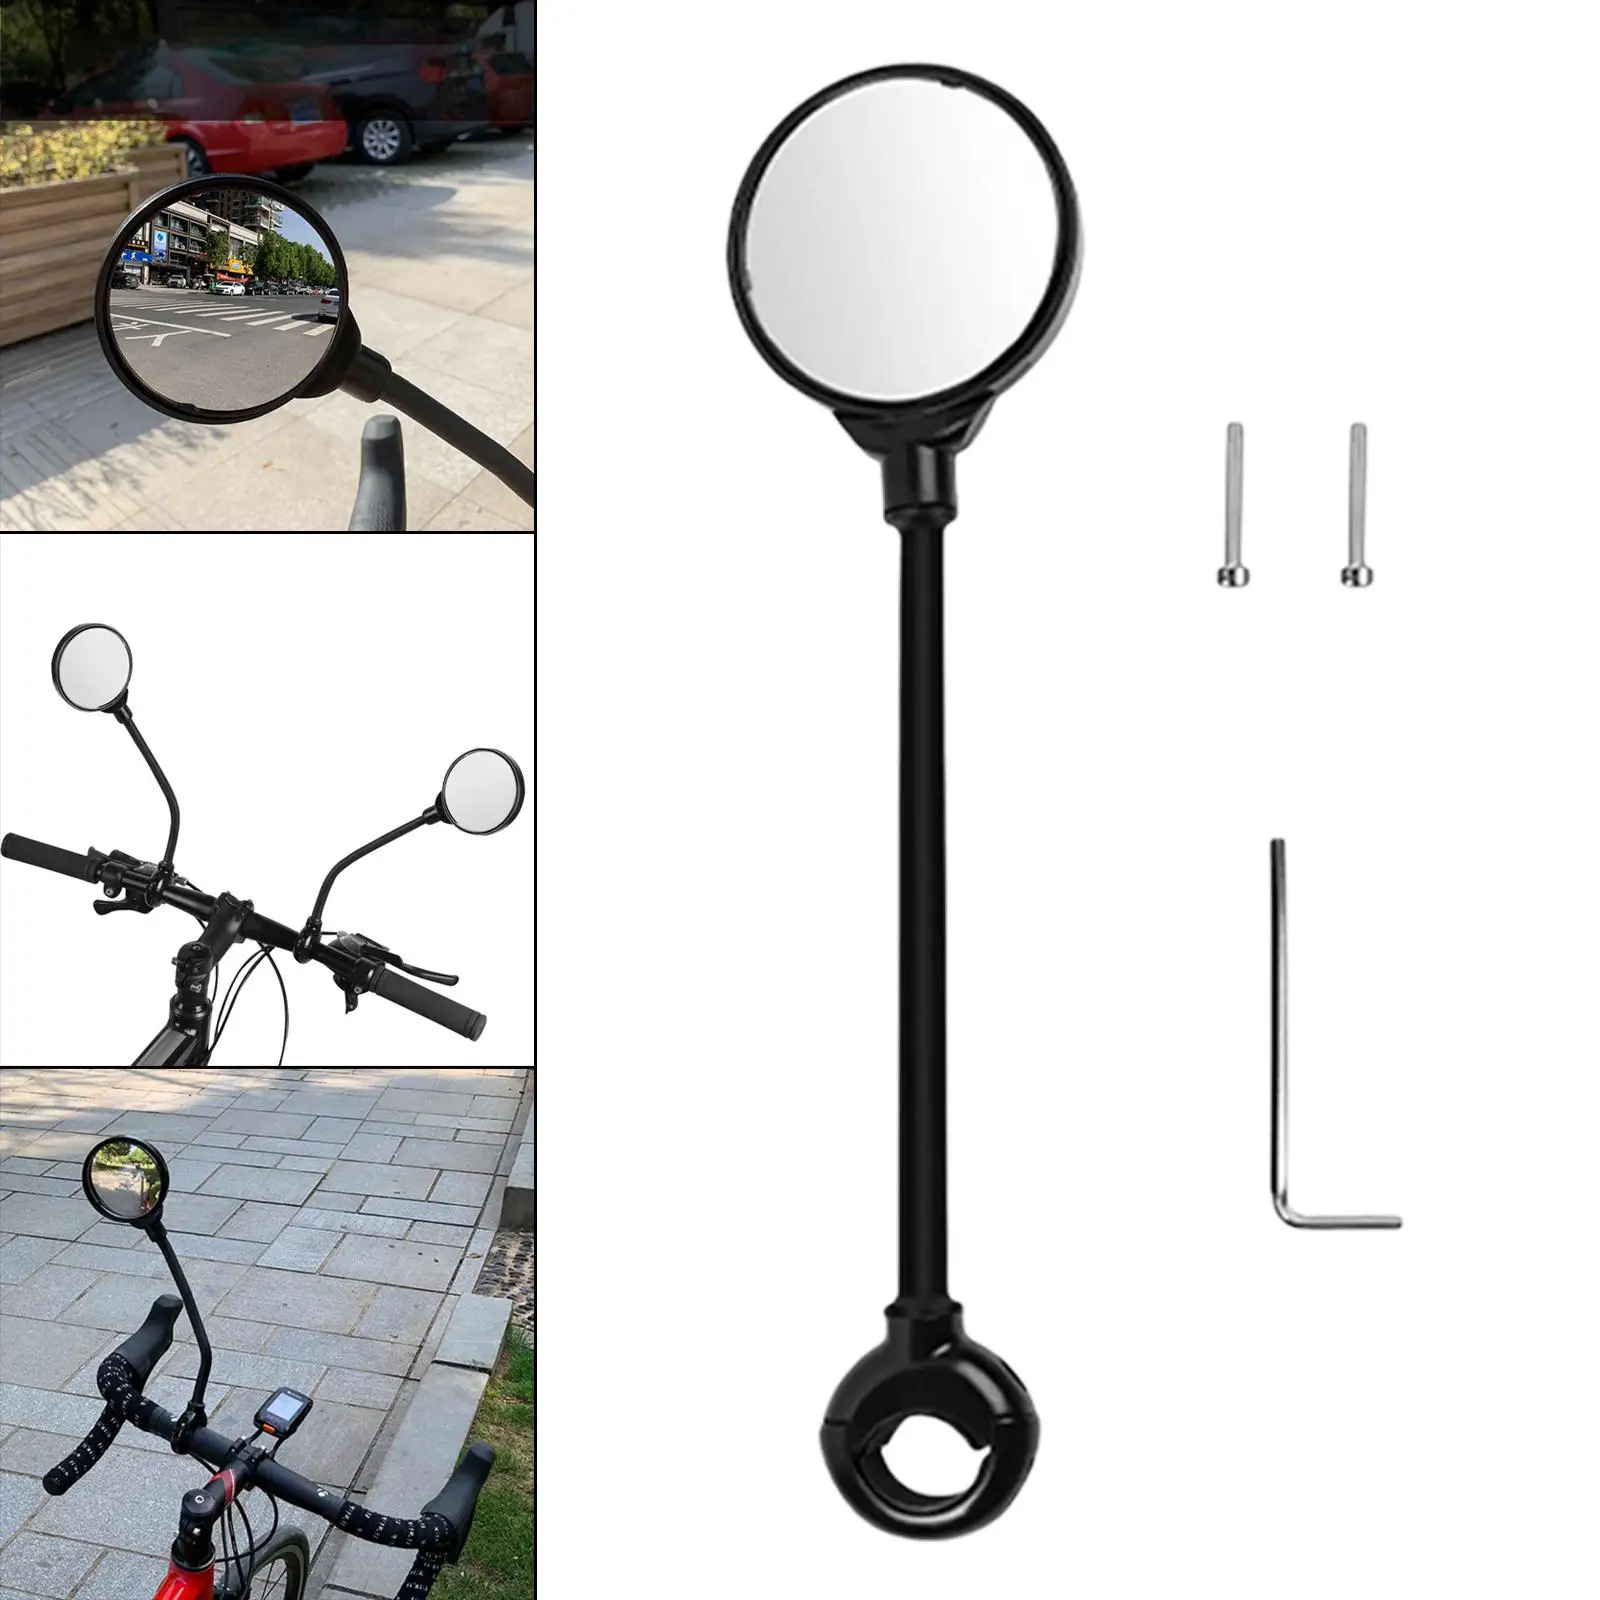 Bicycle Rear View Mirror Rotatable Adjustable Left Right Wide Range Cycling